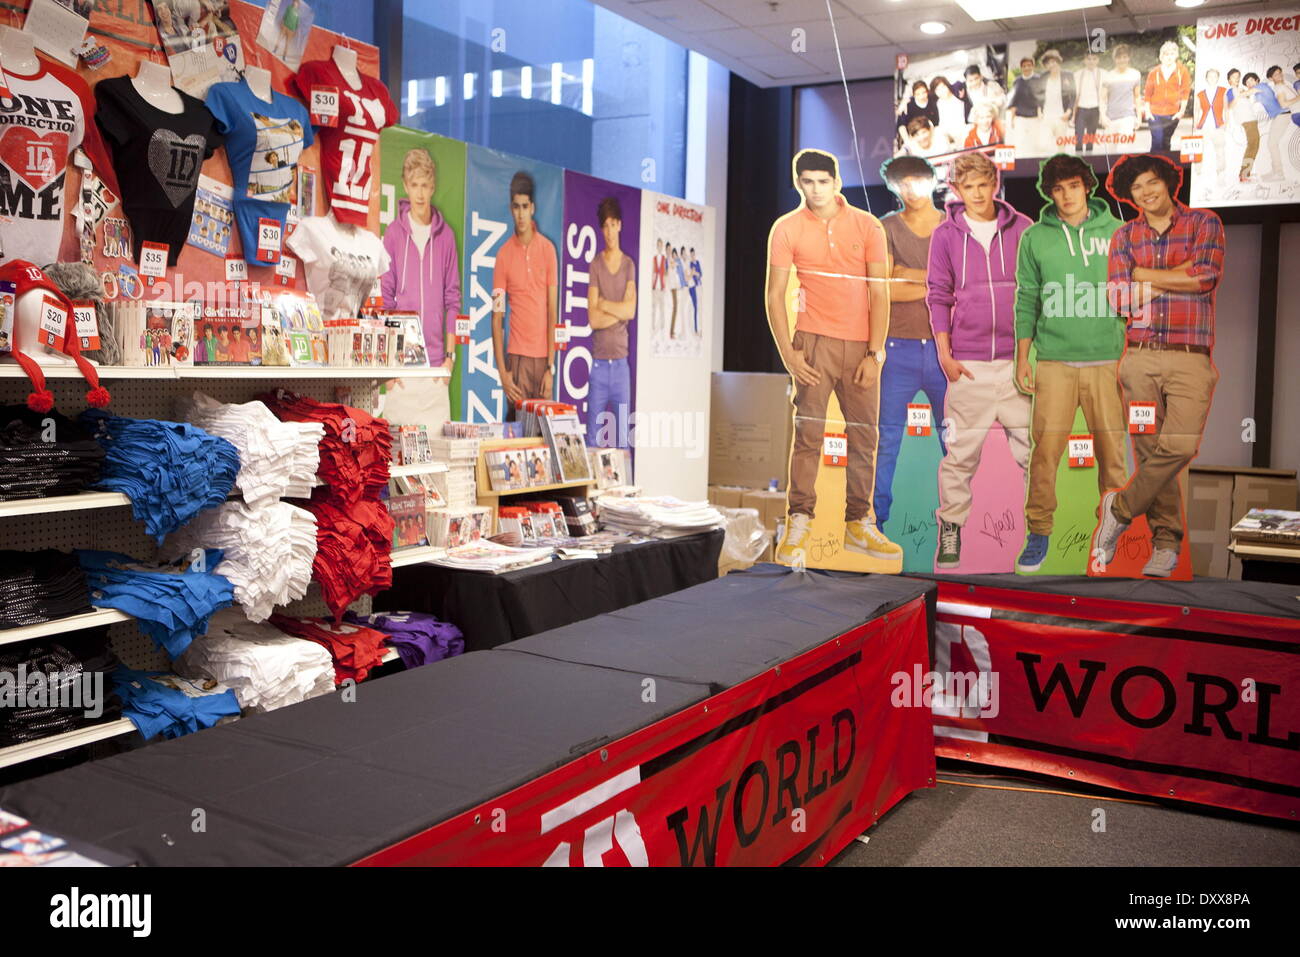 https://c8.alamy.com/comp/DXX8PA/one-direction-fans-visit-the-new-1d-world-pop-up-store-where-they-DXX8PA.jpg